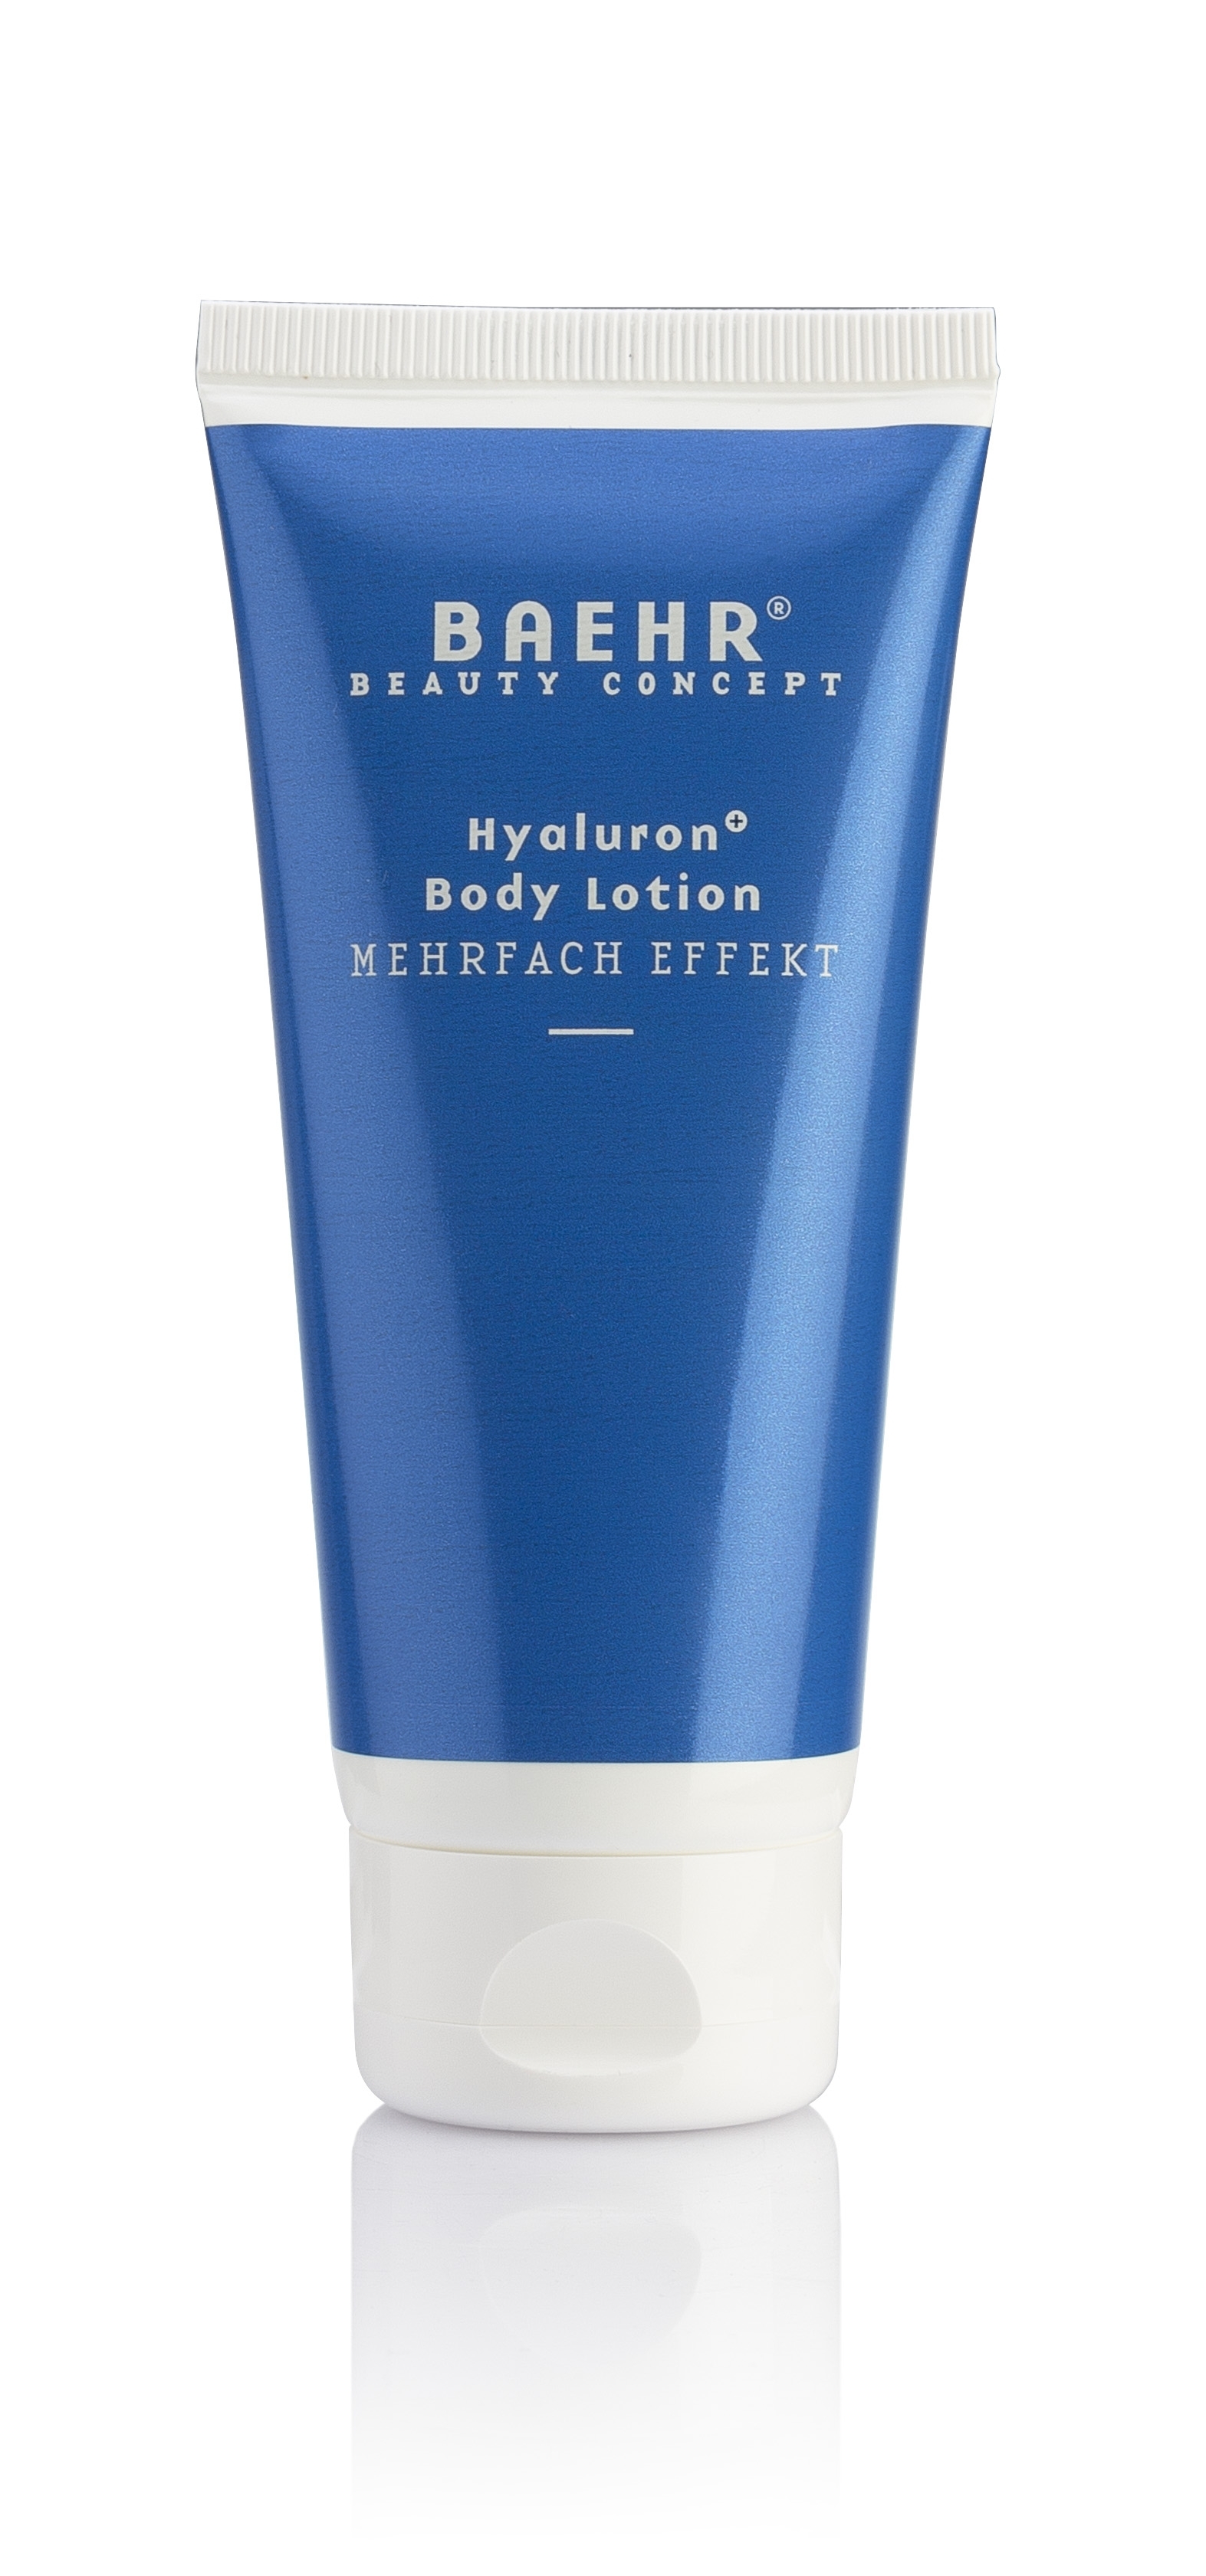 BAEHR BEAUTY CONCEPT Hyaluron+ Body Lotion 100 ml 100 ml